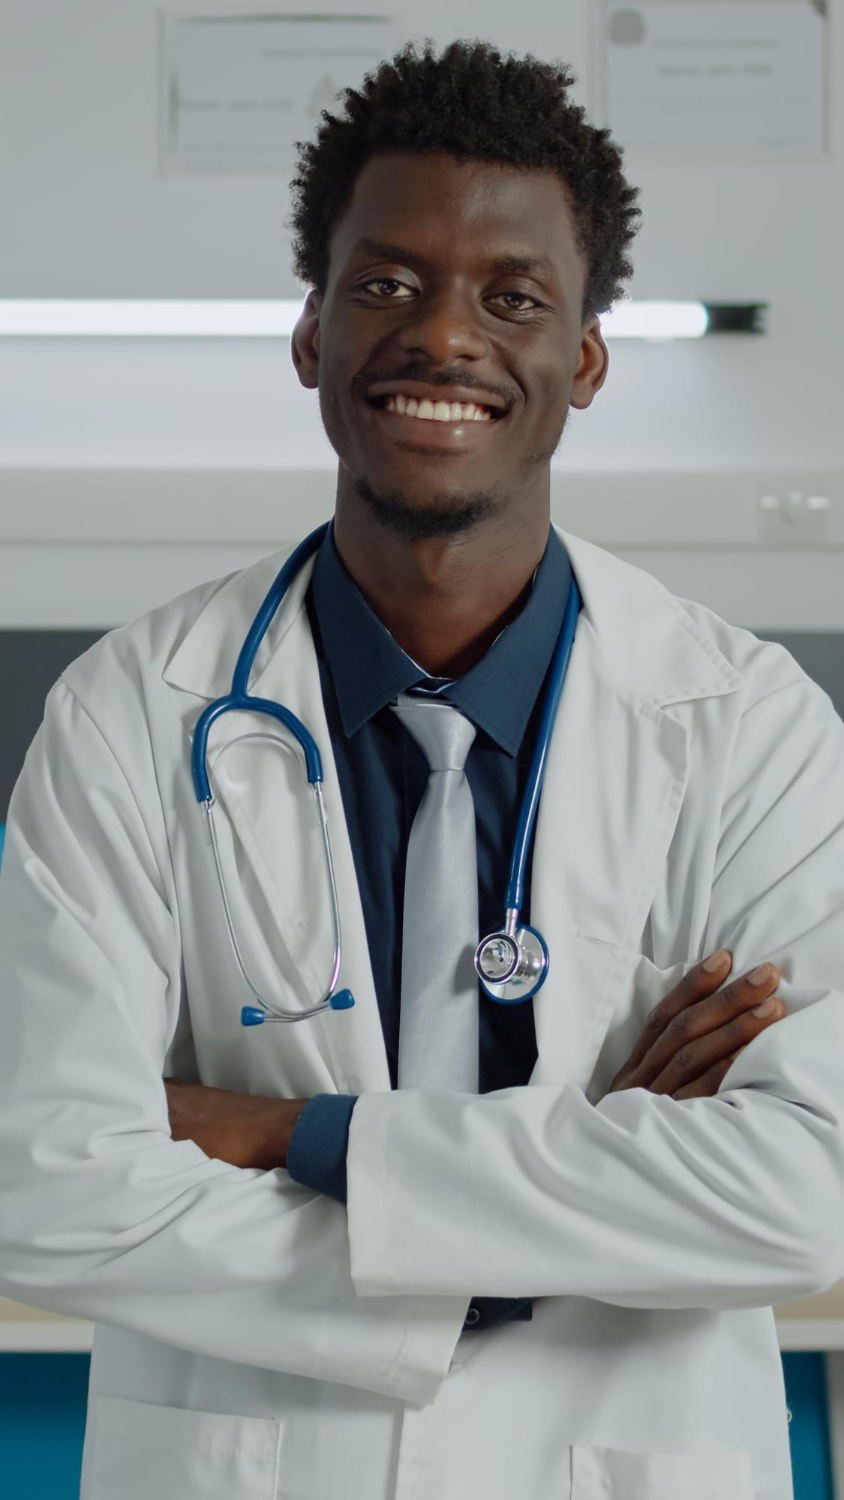 portrait-african-american-doctor-looking-camera-wearing-white-coat-stethoscope-consultation-black-man-smiling-doctors-office-with-equipment-healthcare-facility